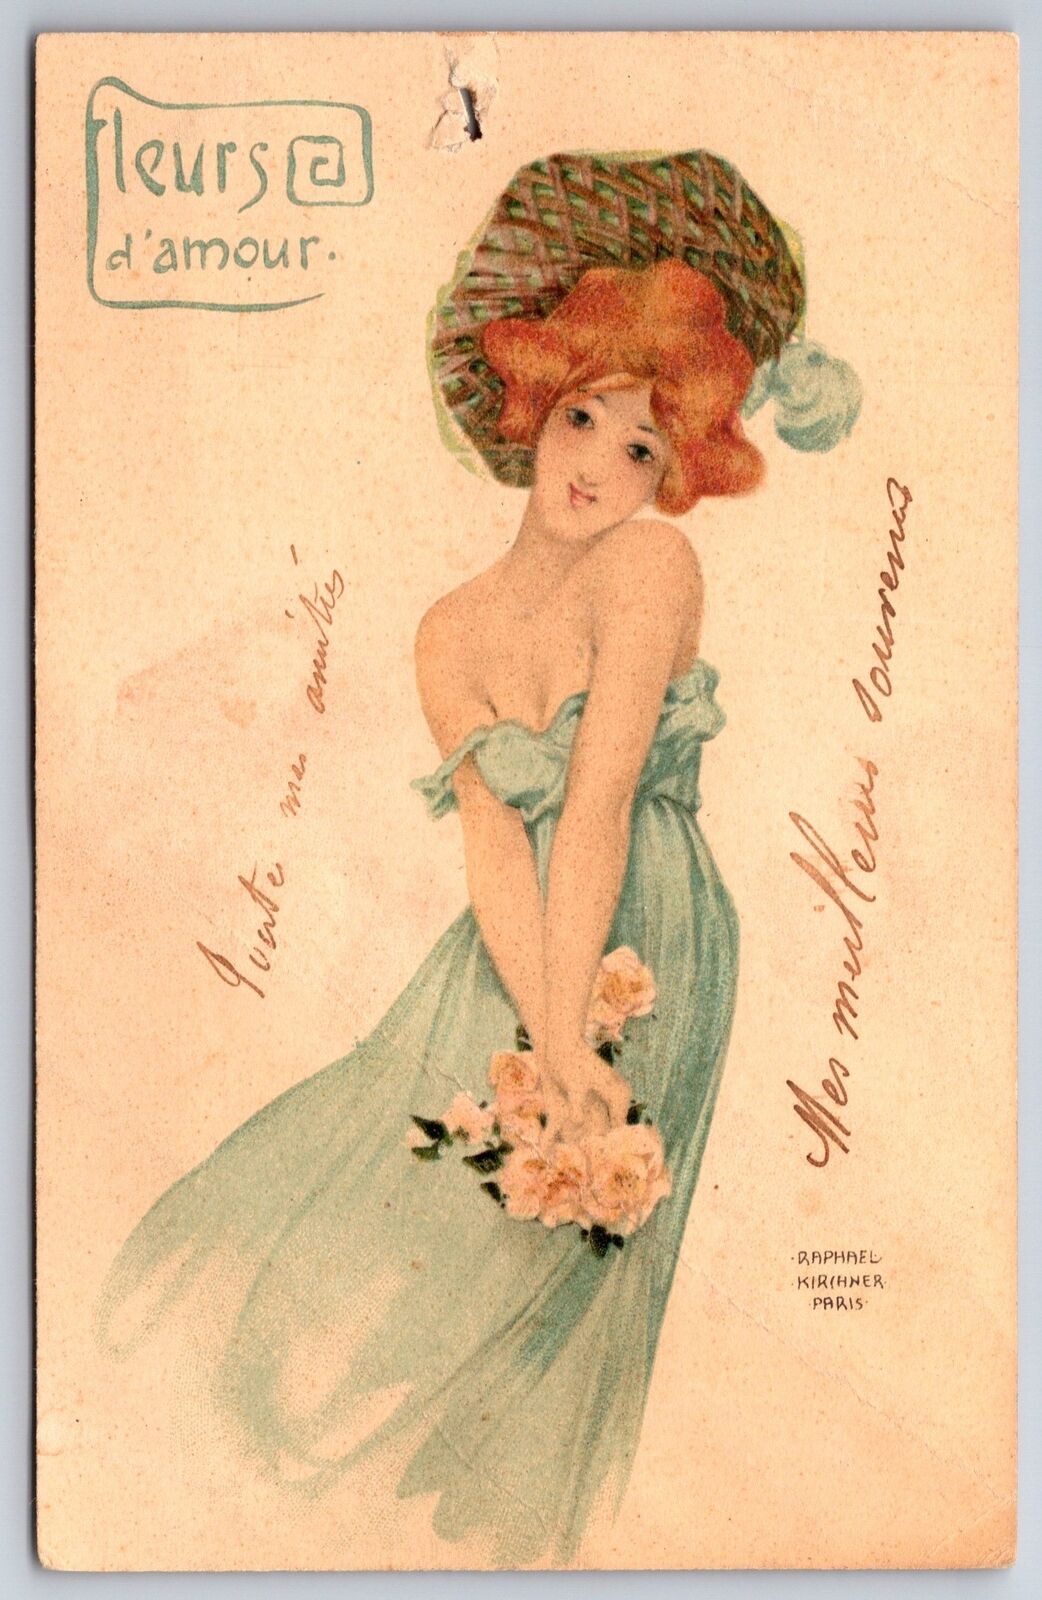 Raphael Kirchner~Lovely Redheaded Lady With Yellow Roses~Fleurs D'Amour~Paris